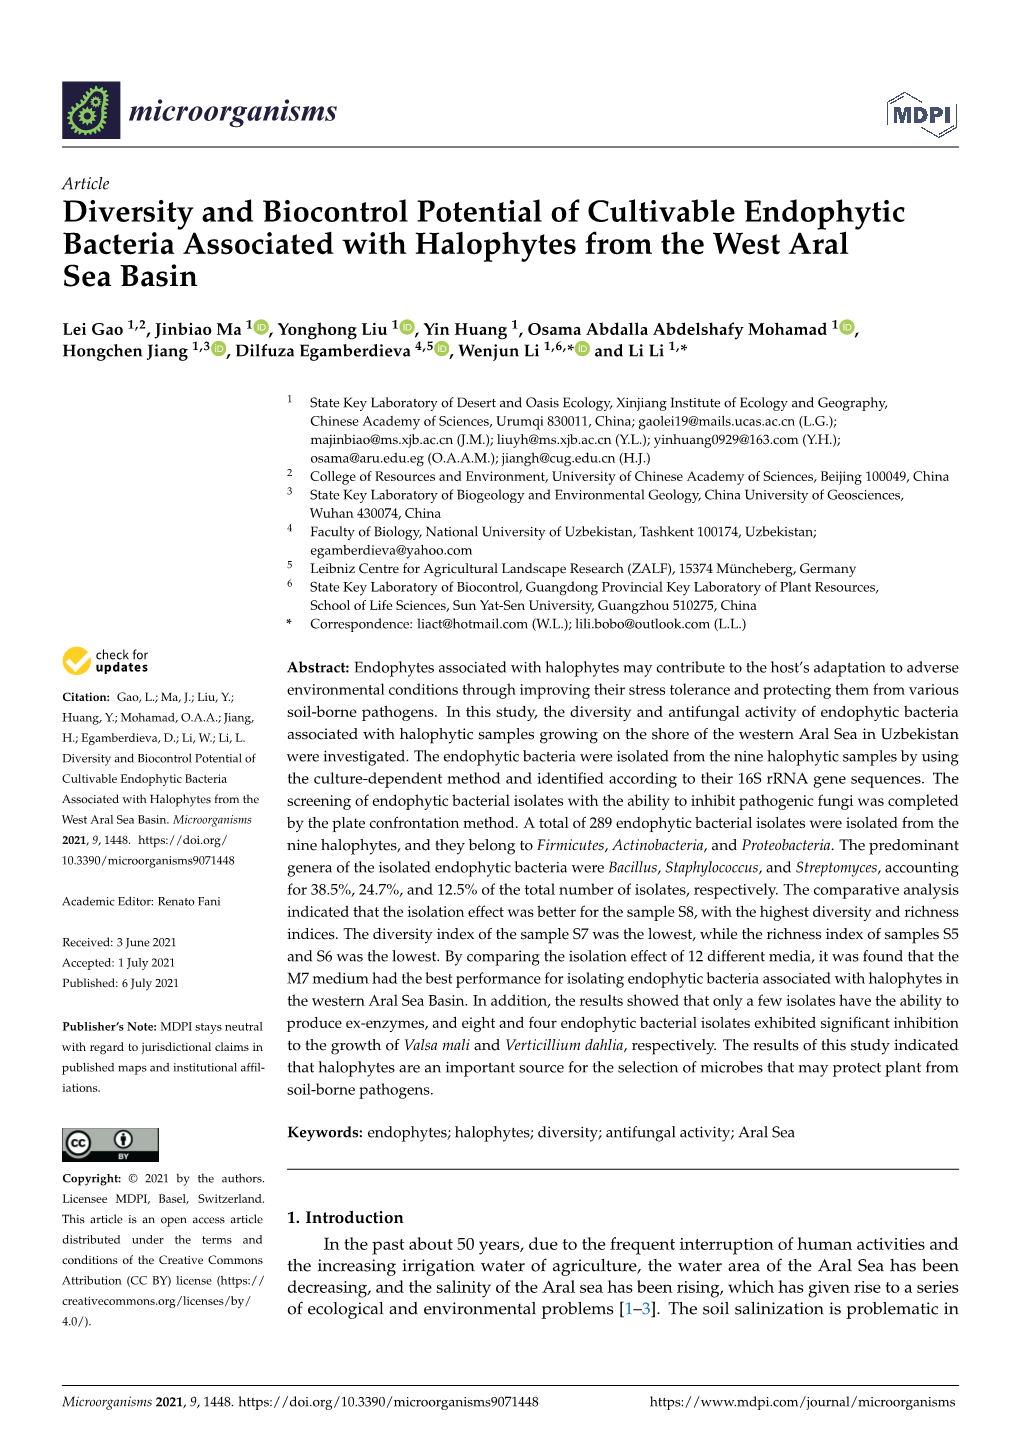 Diversity and Biocontrol Potential of Cultivable Endophytic Bacteria Associated with Halophytes from the West Aral Sea Basin